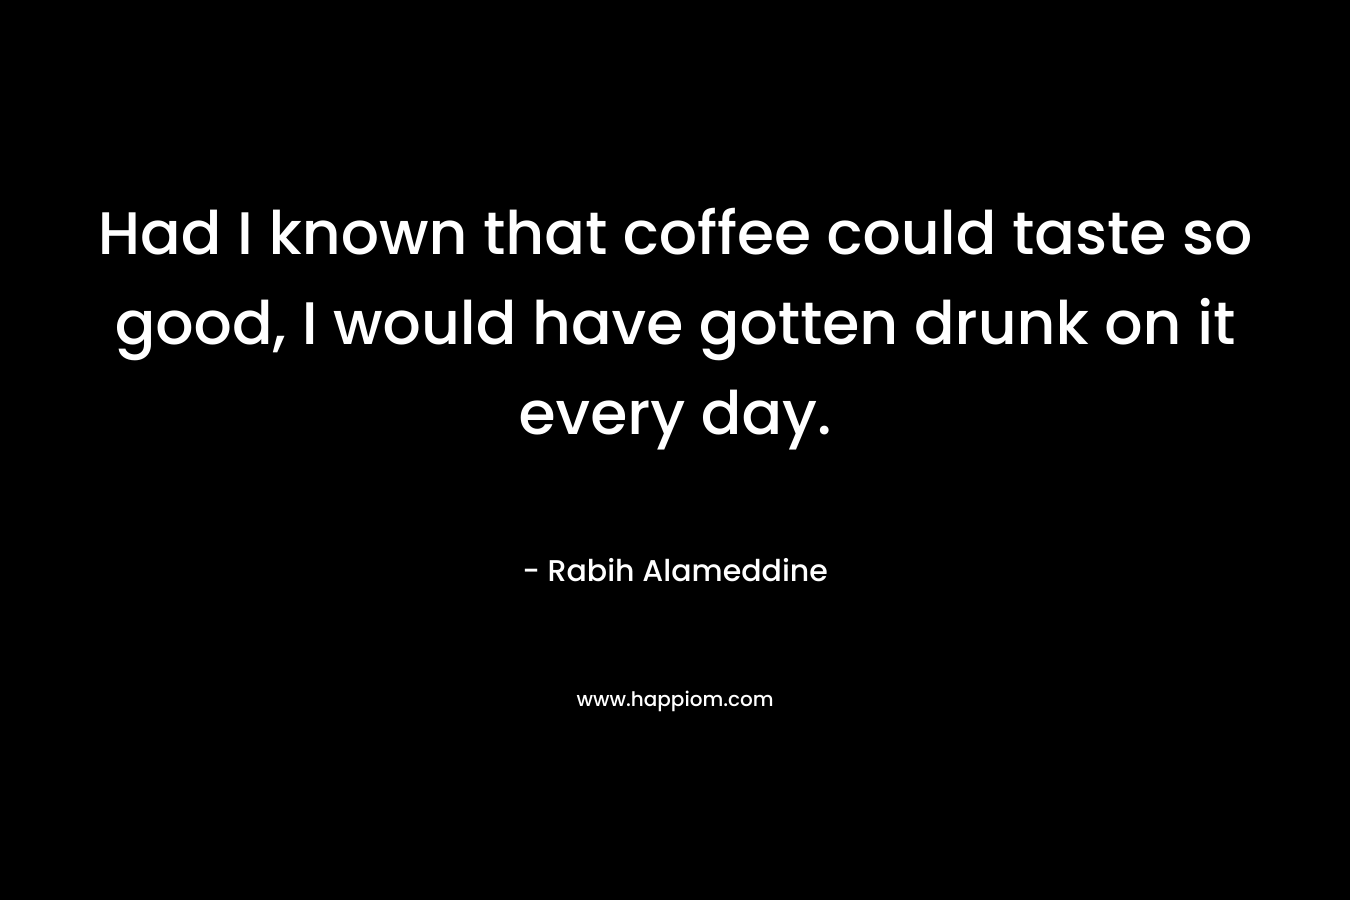 Had I known that coffee could taste so good, I would have gotten drunk on it every day.